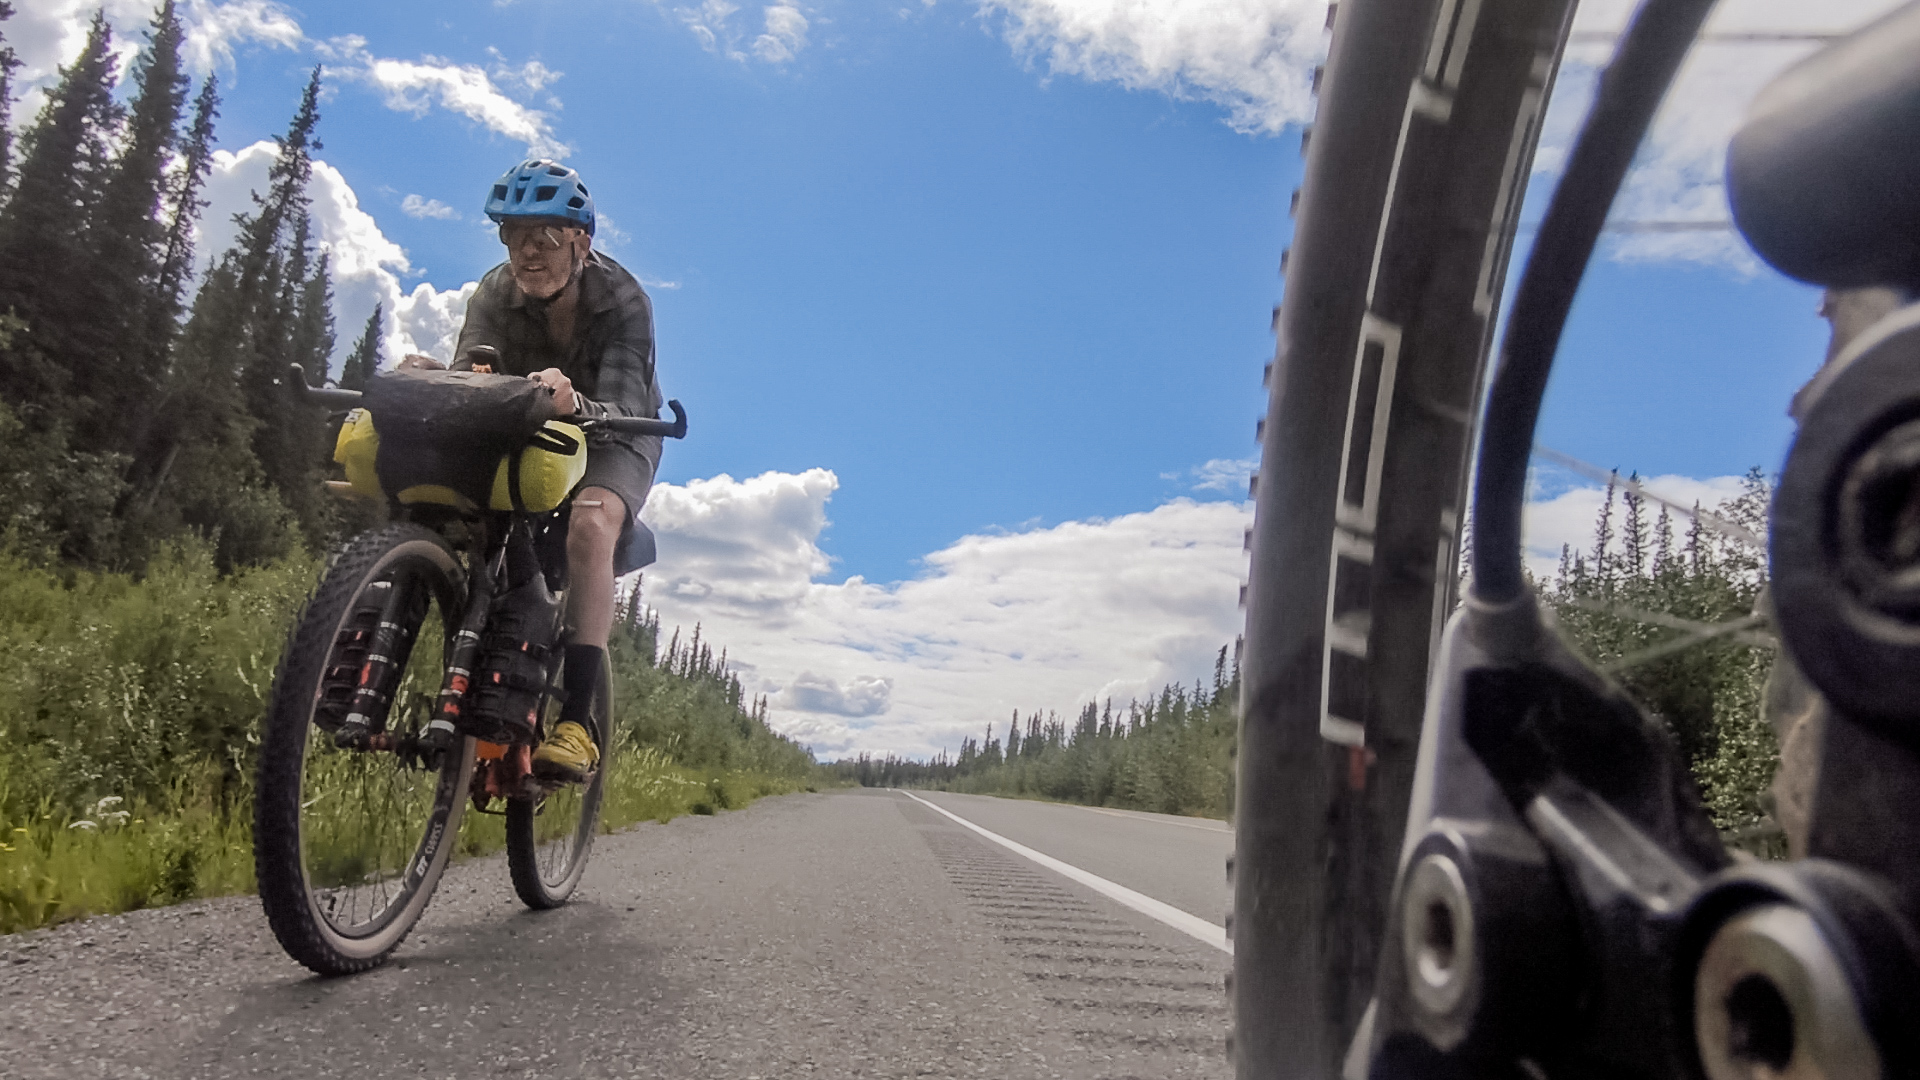 Bikepacking Alaska | The view from here